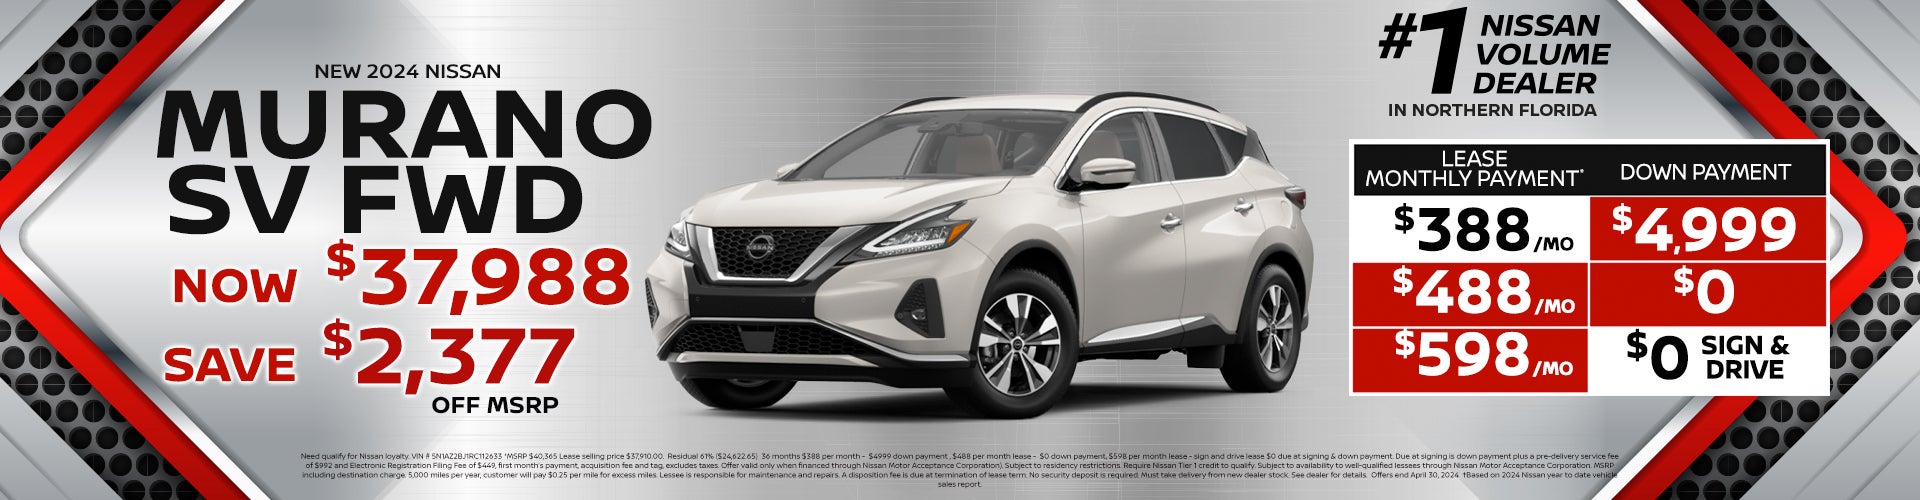 2024 Murano Lease for as low as $388 per month